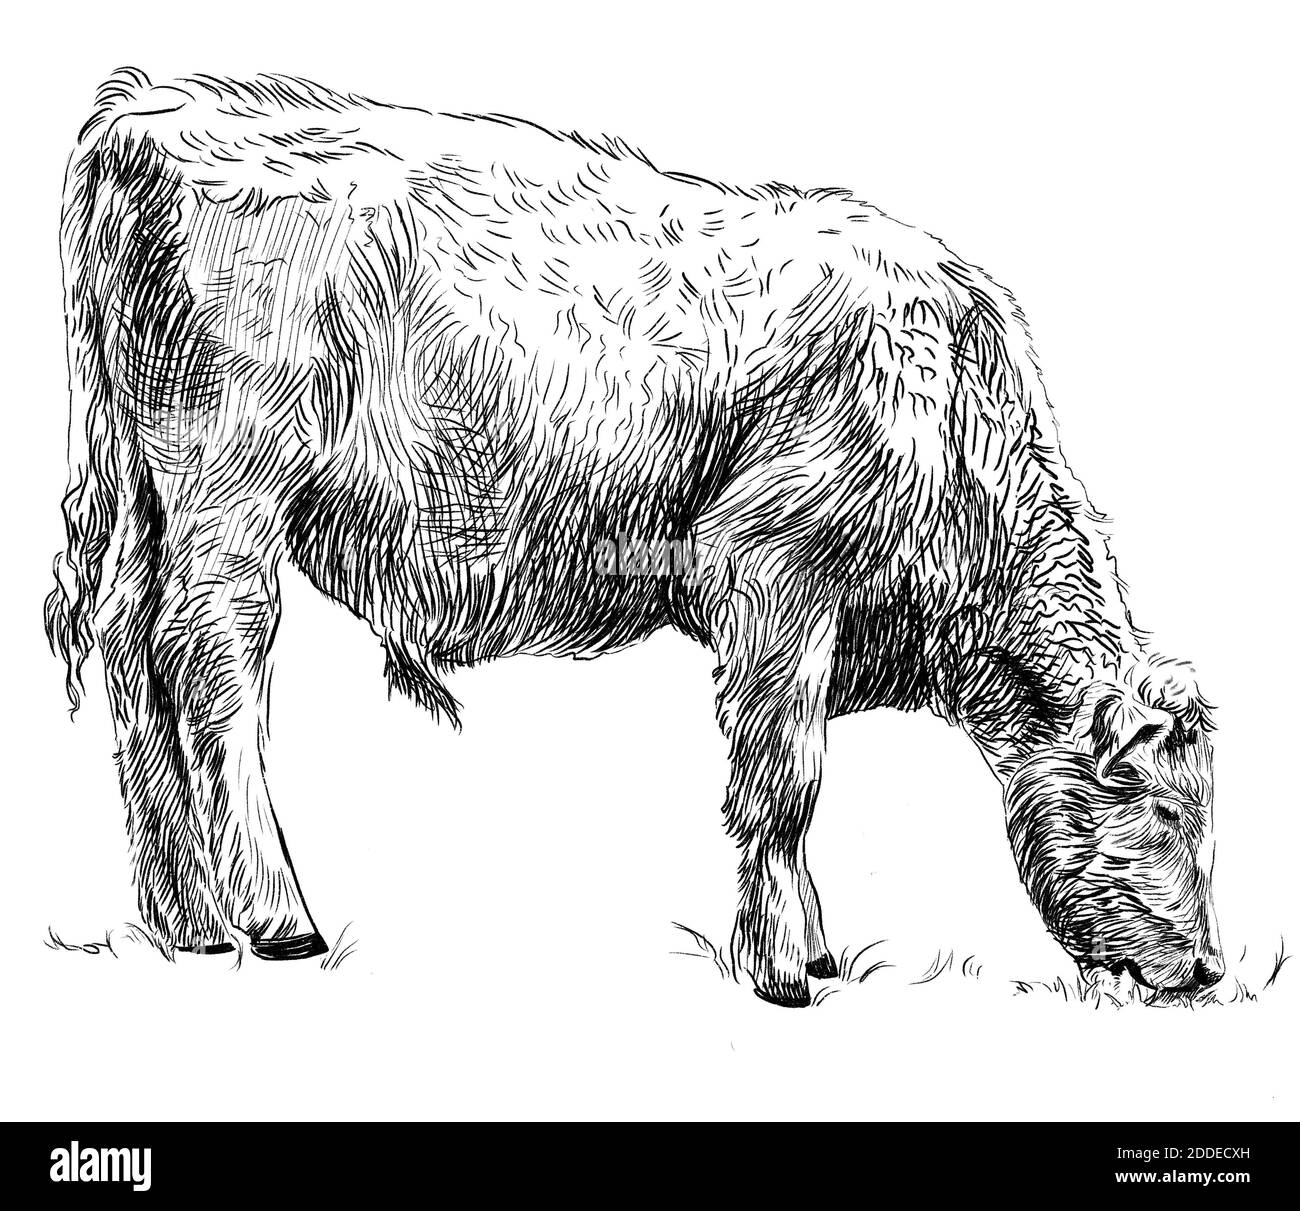 Sketch of calf eating grass. Cow, bull, farm animal. Hand drawn black and white graphic illustration Stock Photo